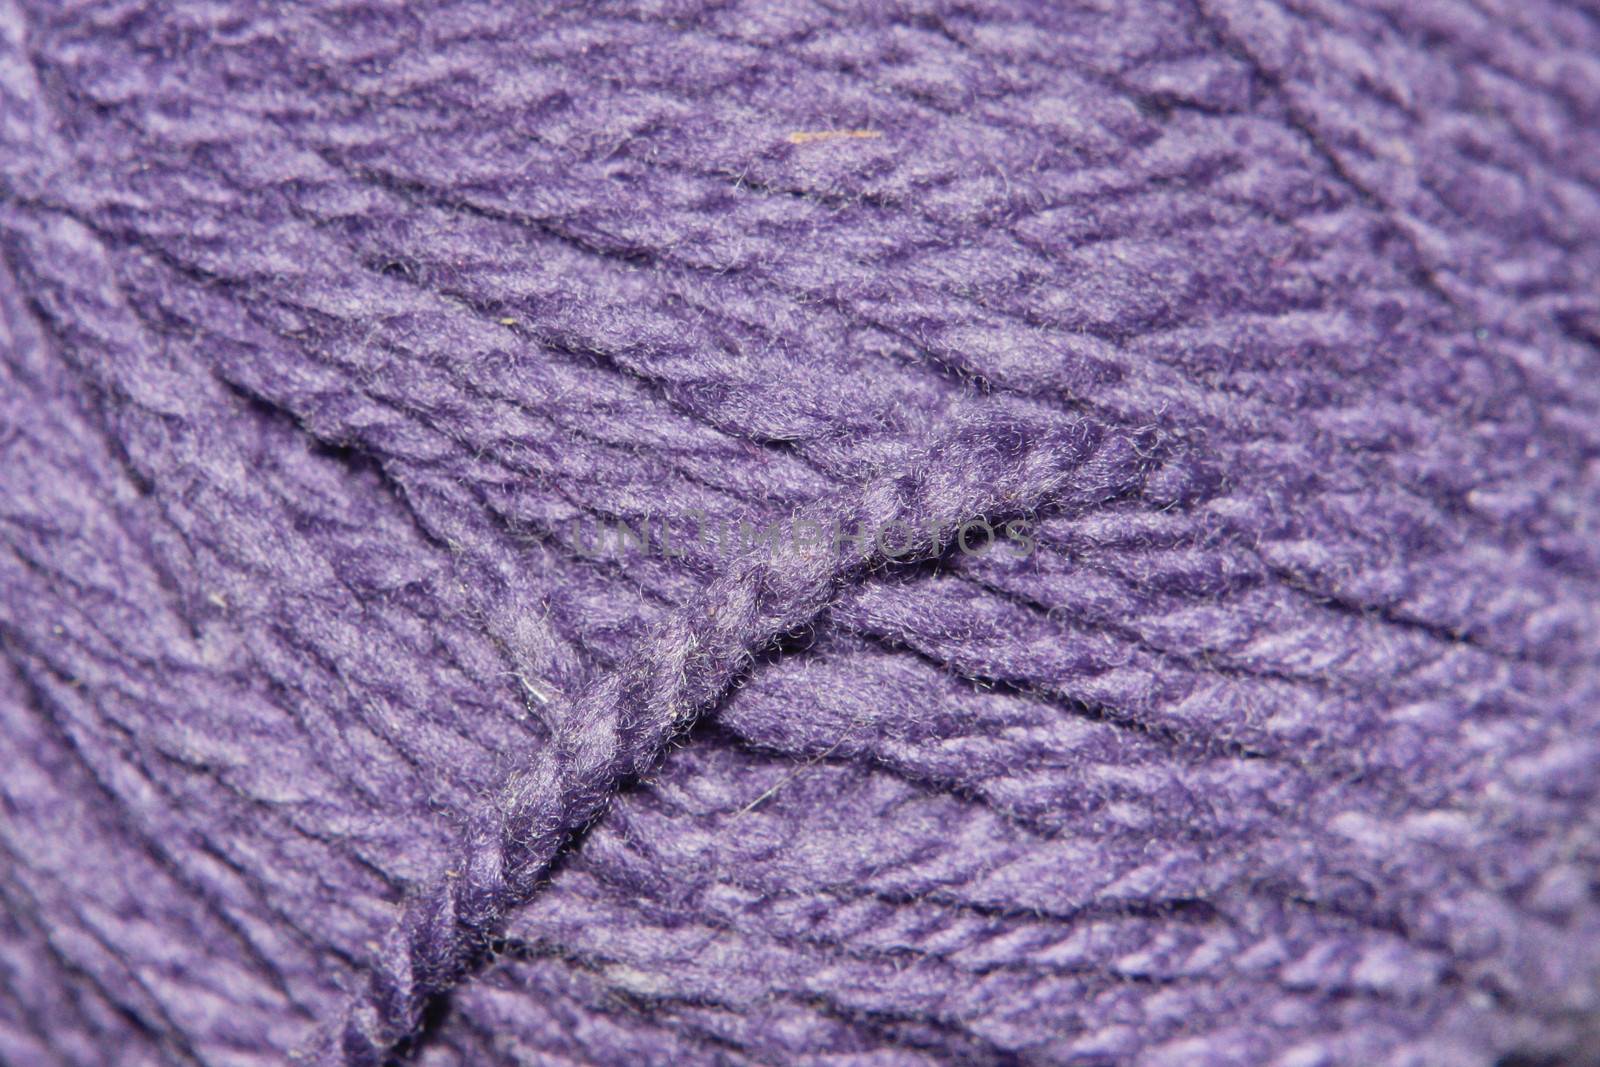 Purple wool close up showing thread with shallow depth of field